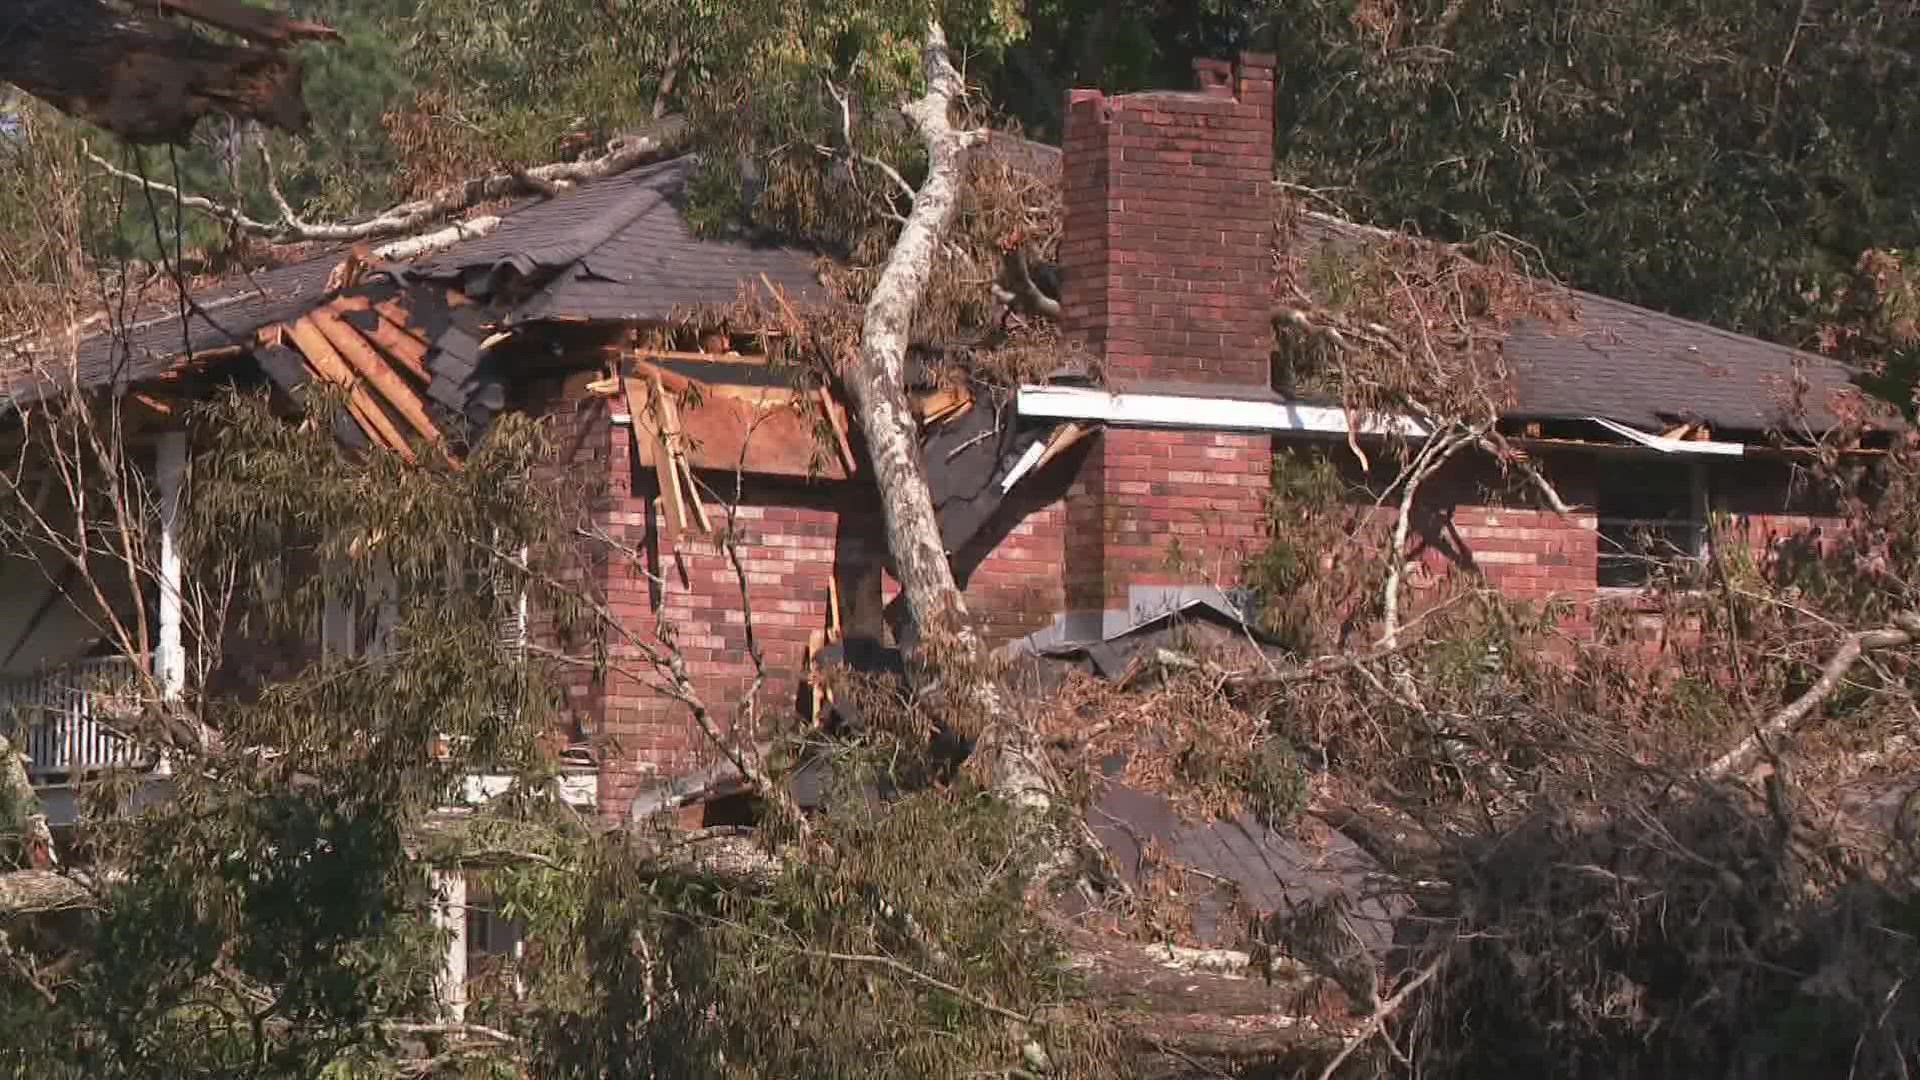 Repairs start nearly a week after Hurricane Ida that left cities in shambles including homes in St. Tammany.